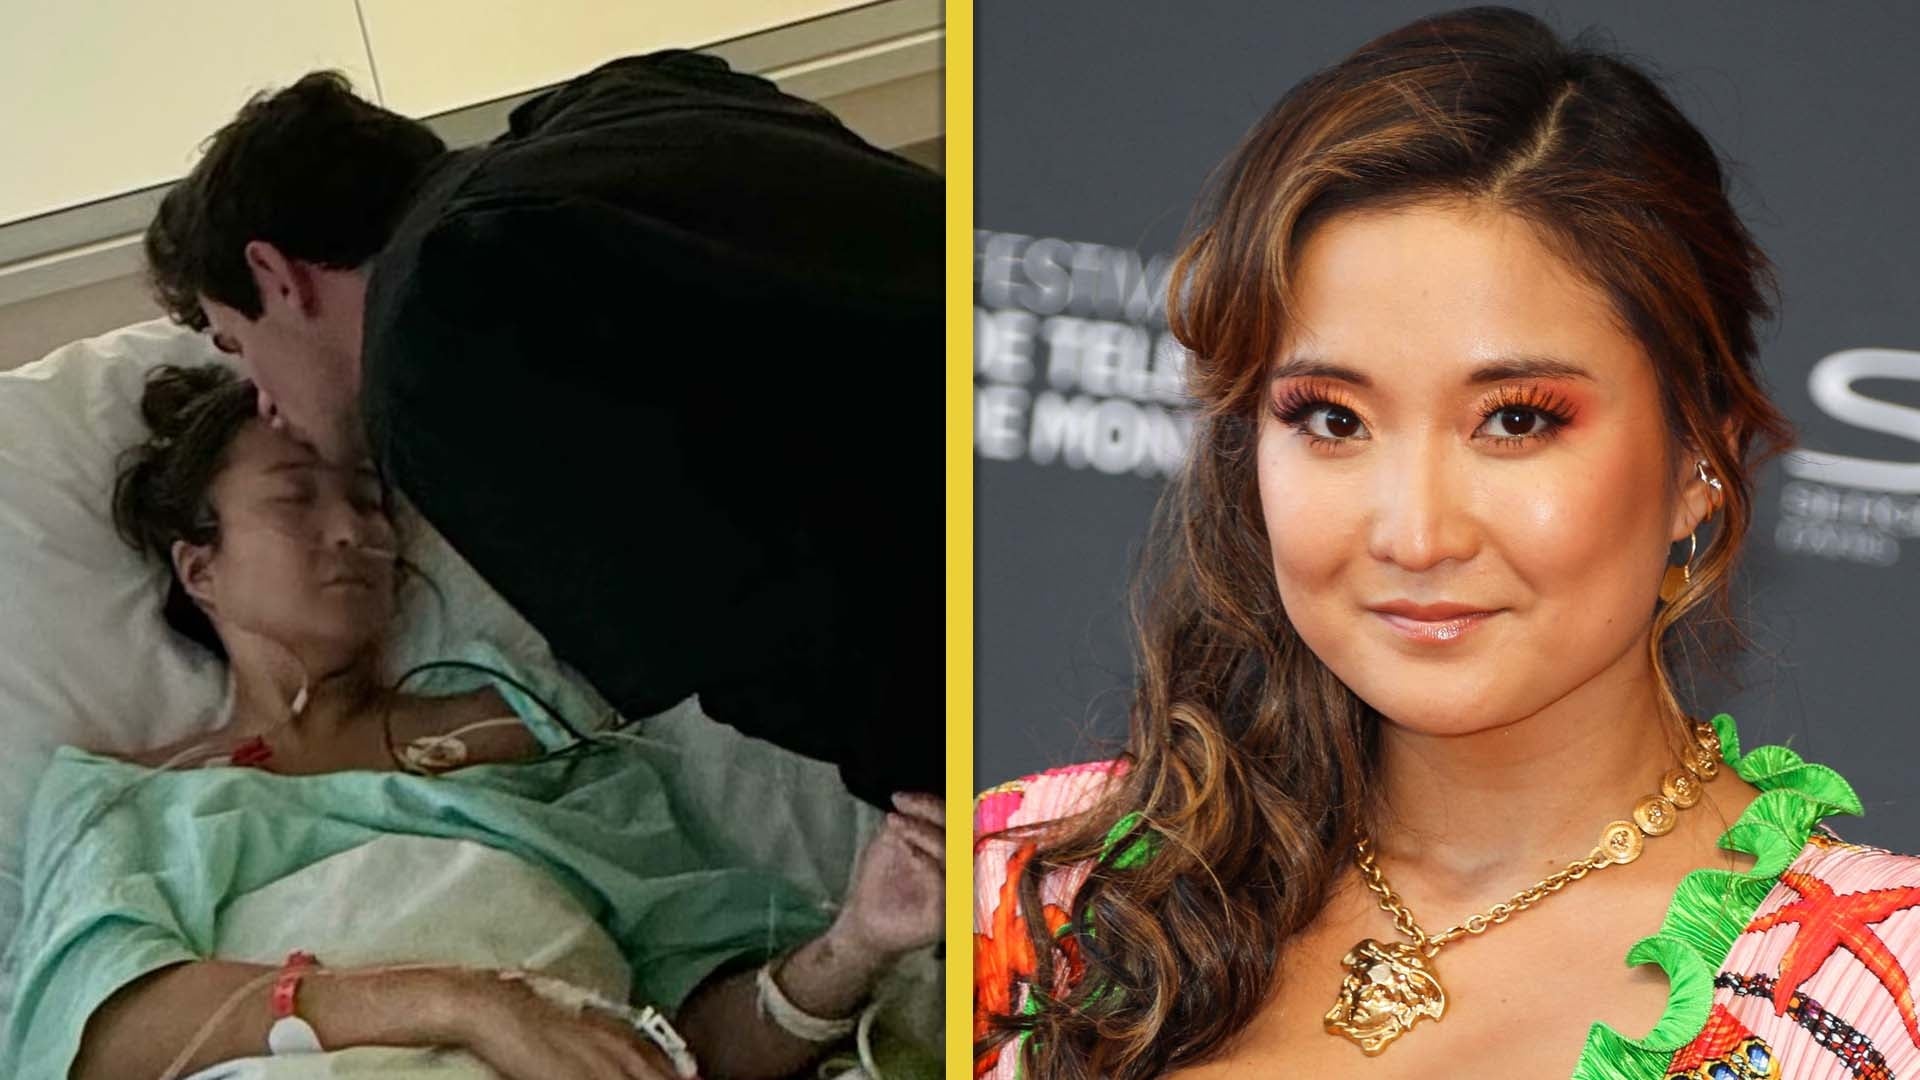 'Emily in Paris' Star Ashley Park Hospitalized in ICU For 'Critical' Septic Shock